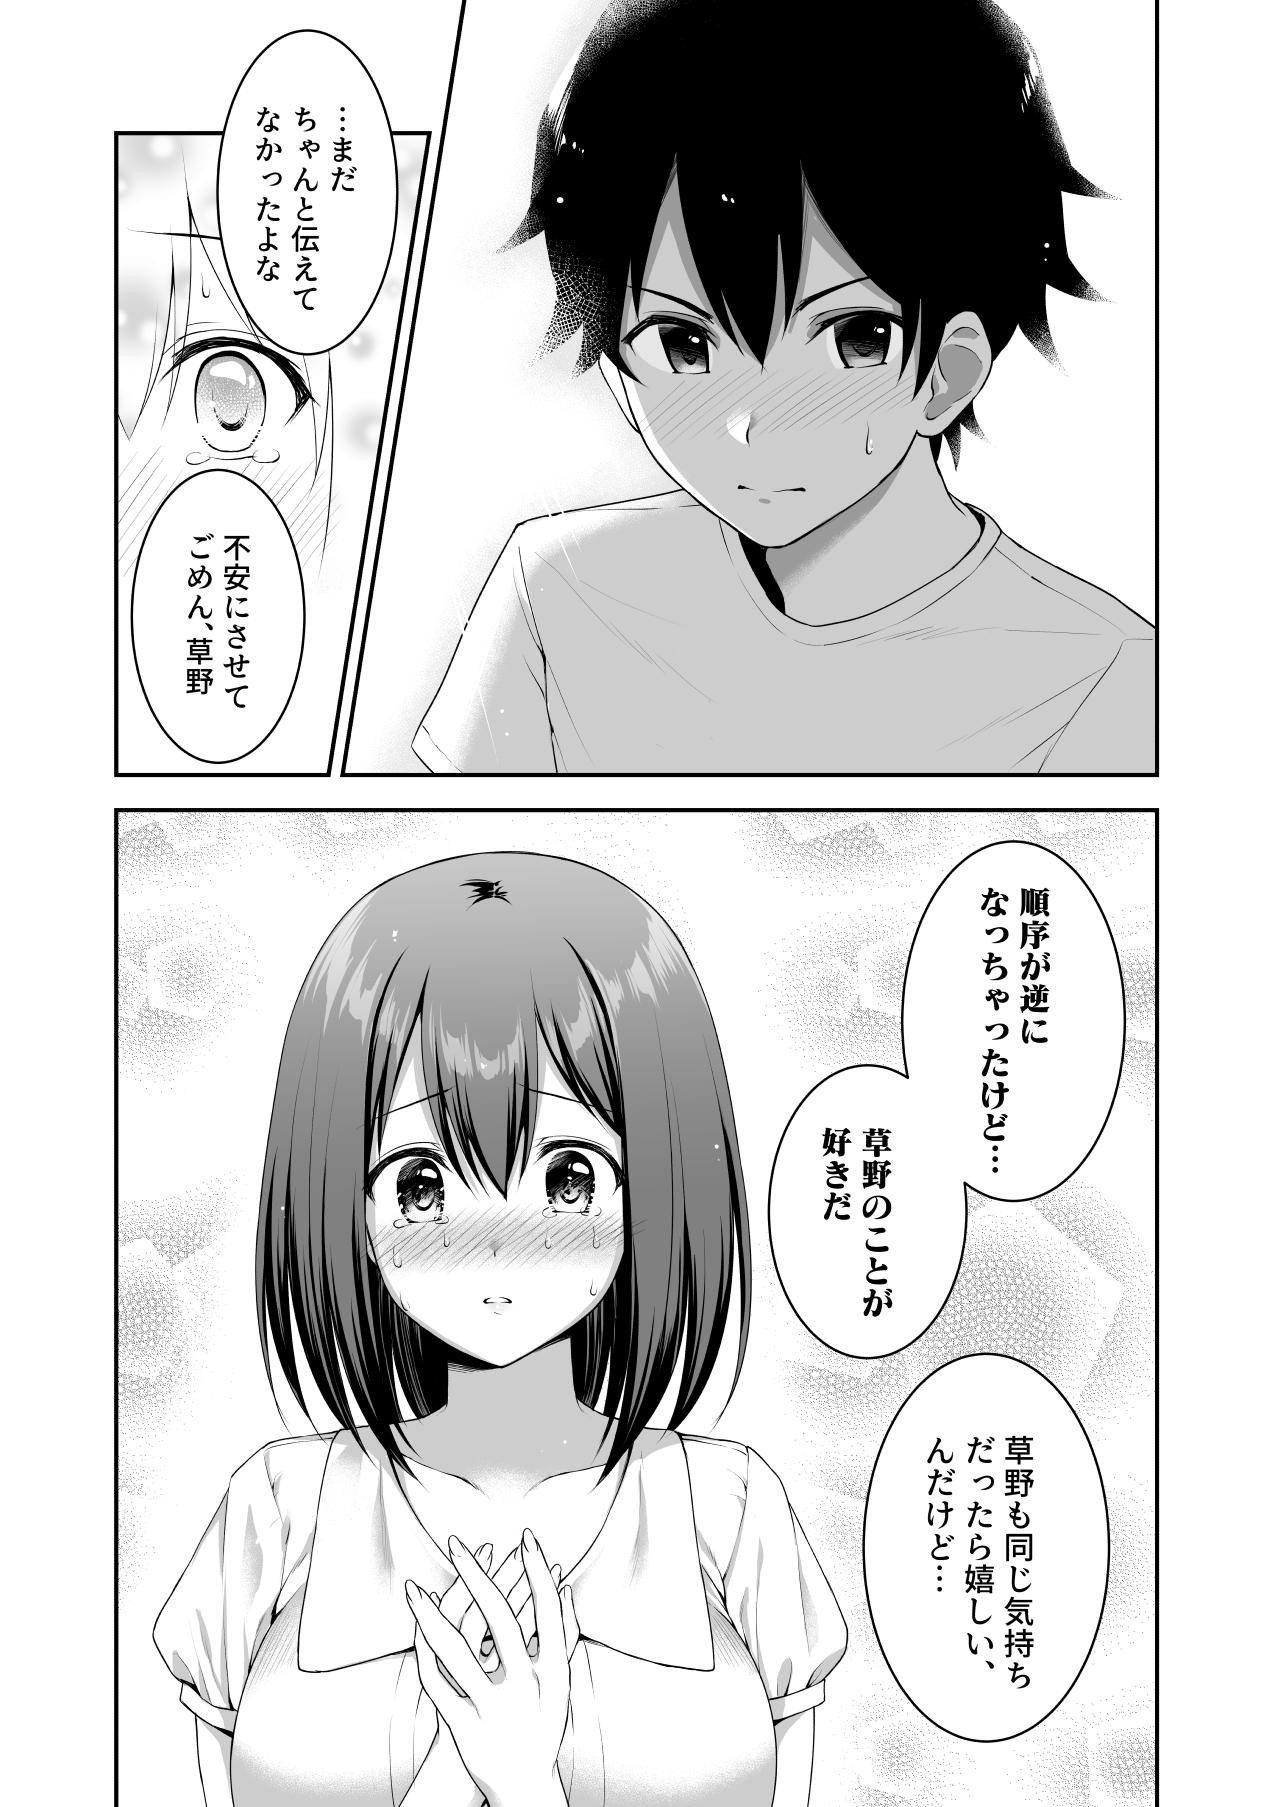 The 優衣コネ - Princess connect Spa - Page 12